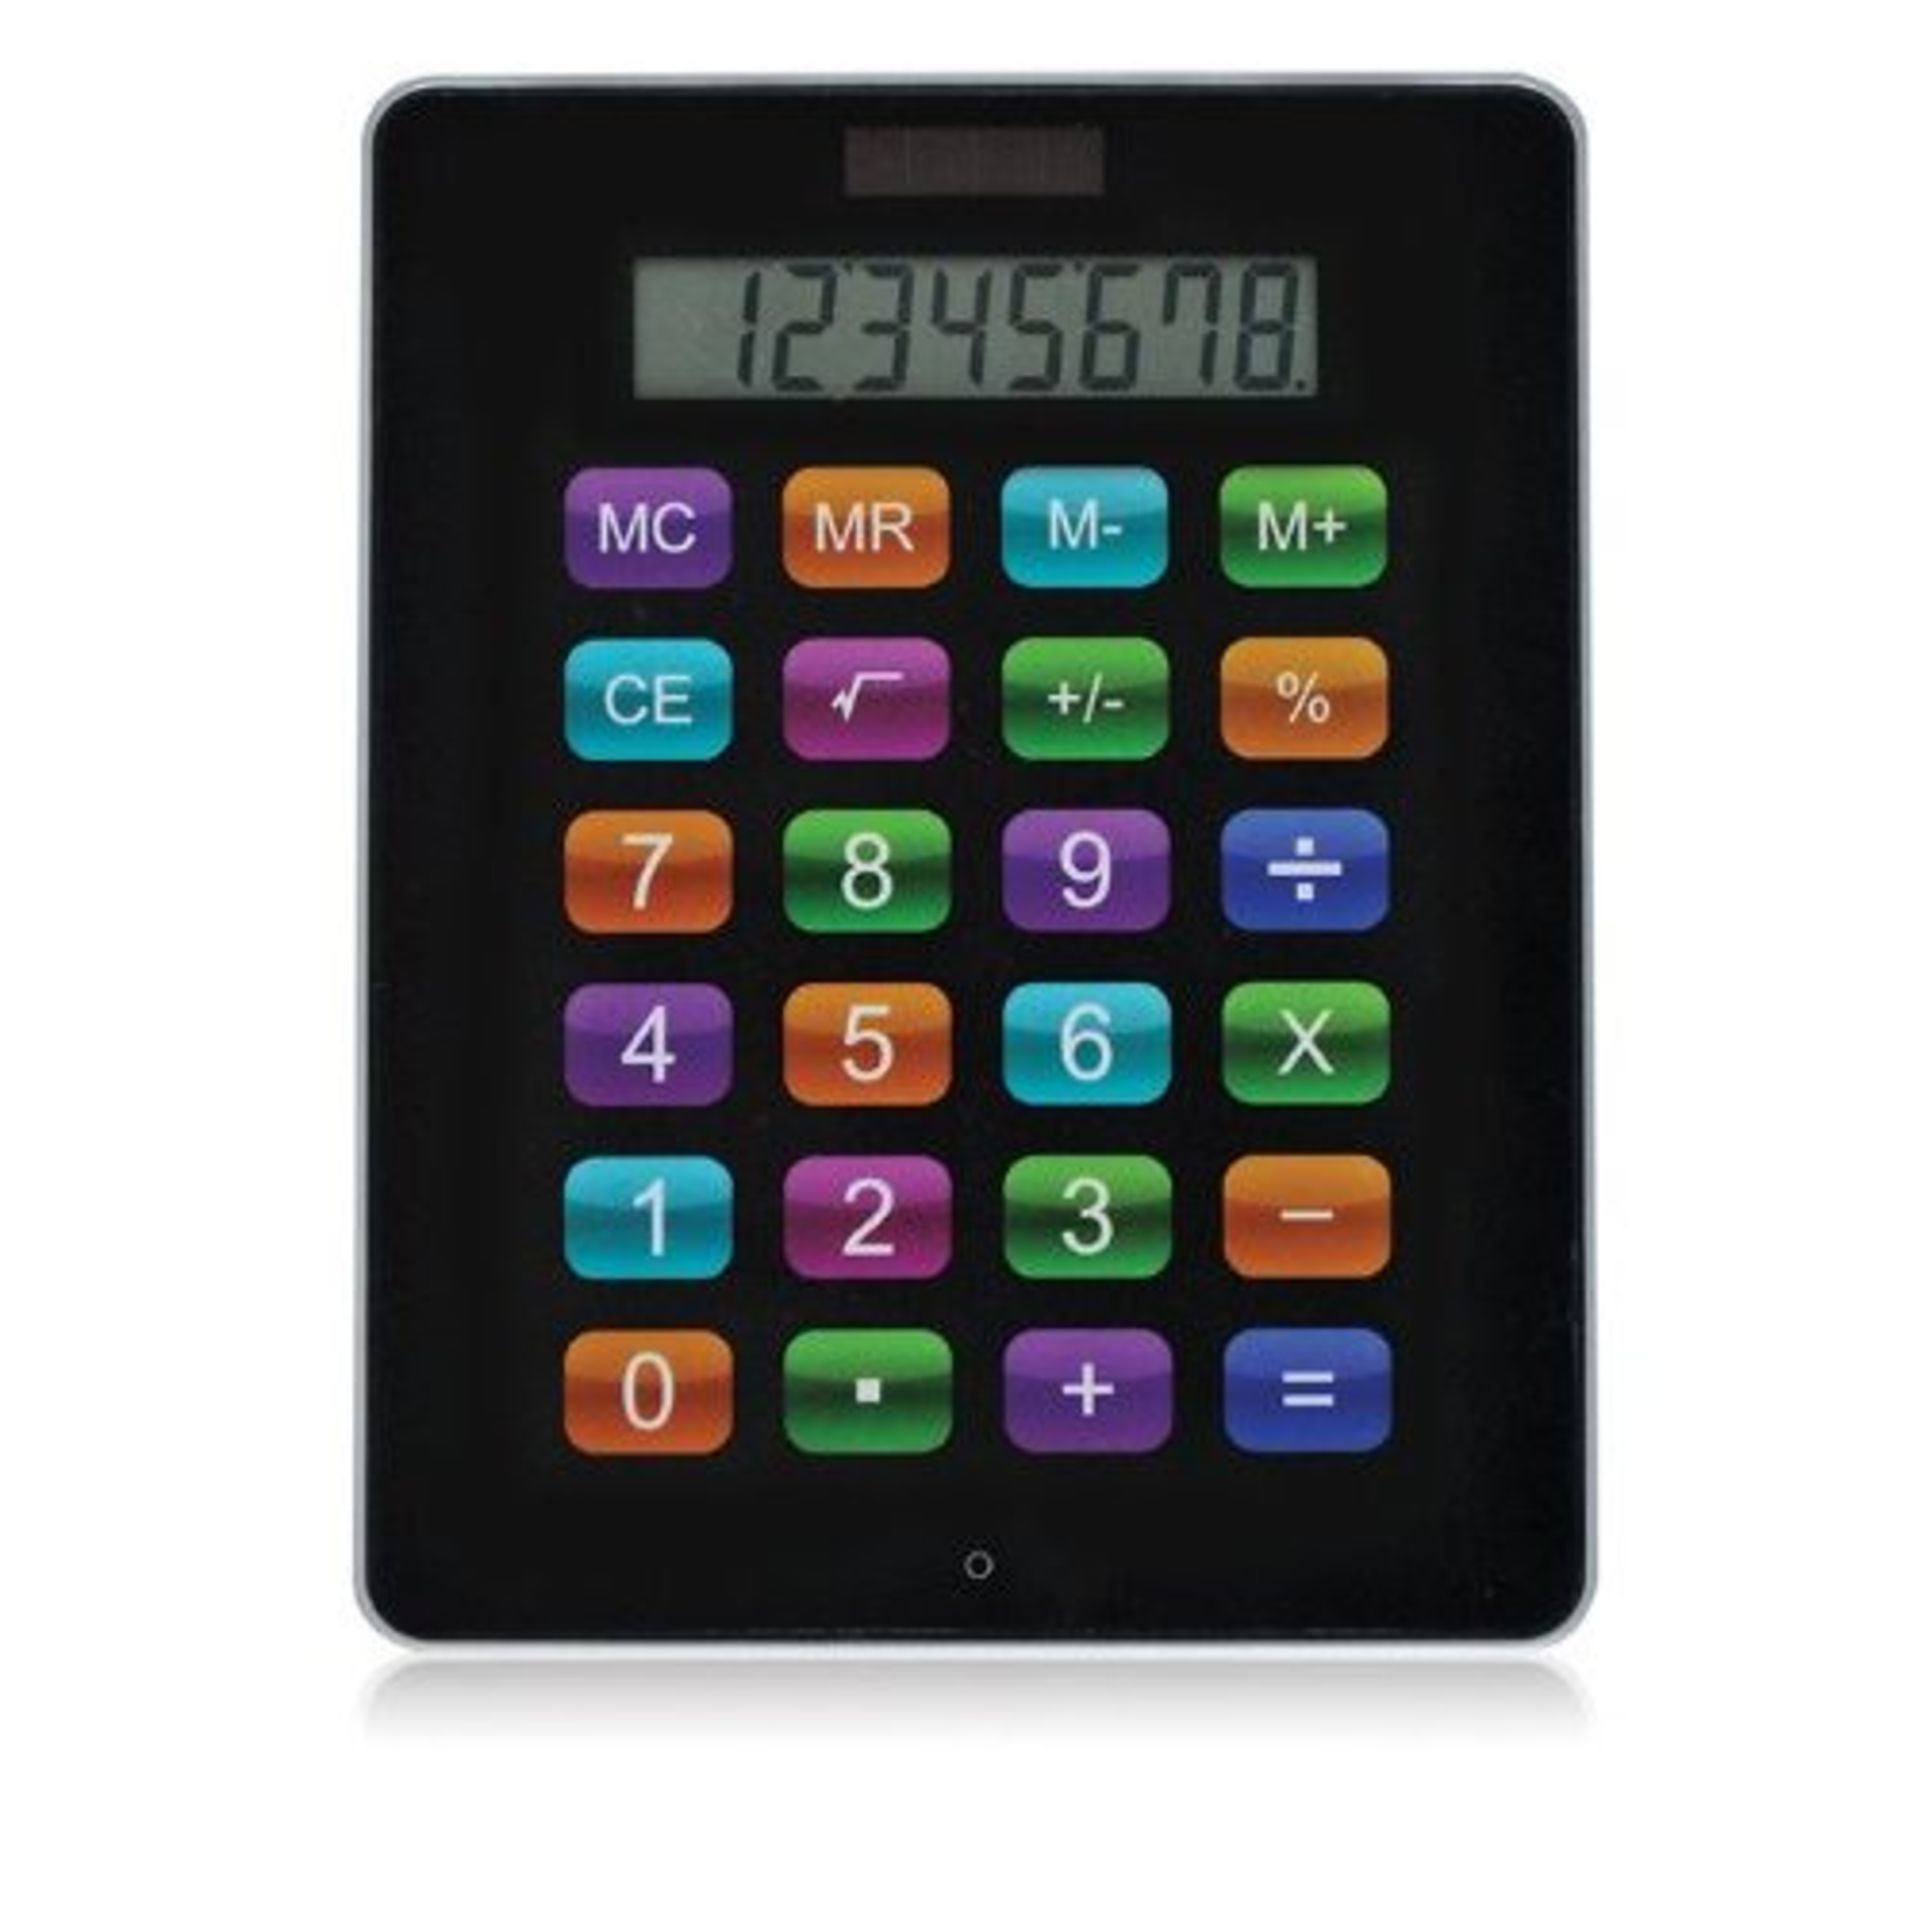 V Brand New Ipad Calculator-Battery powered with solar backup X  2  Bid price to be multiplied by